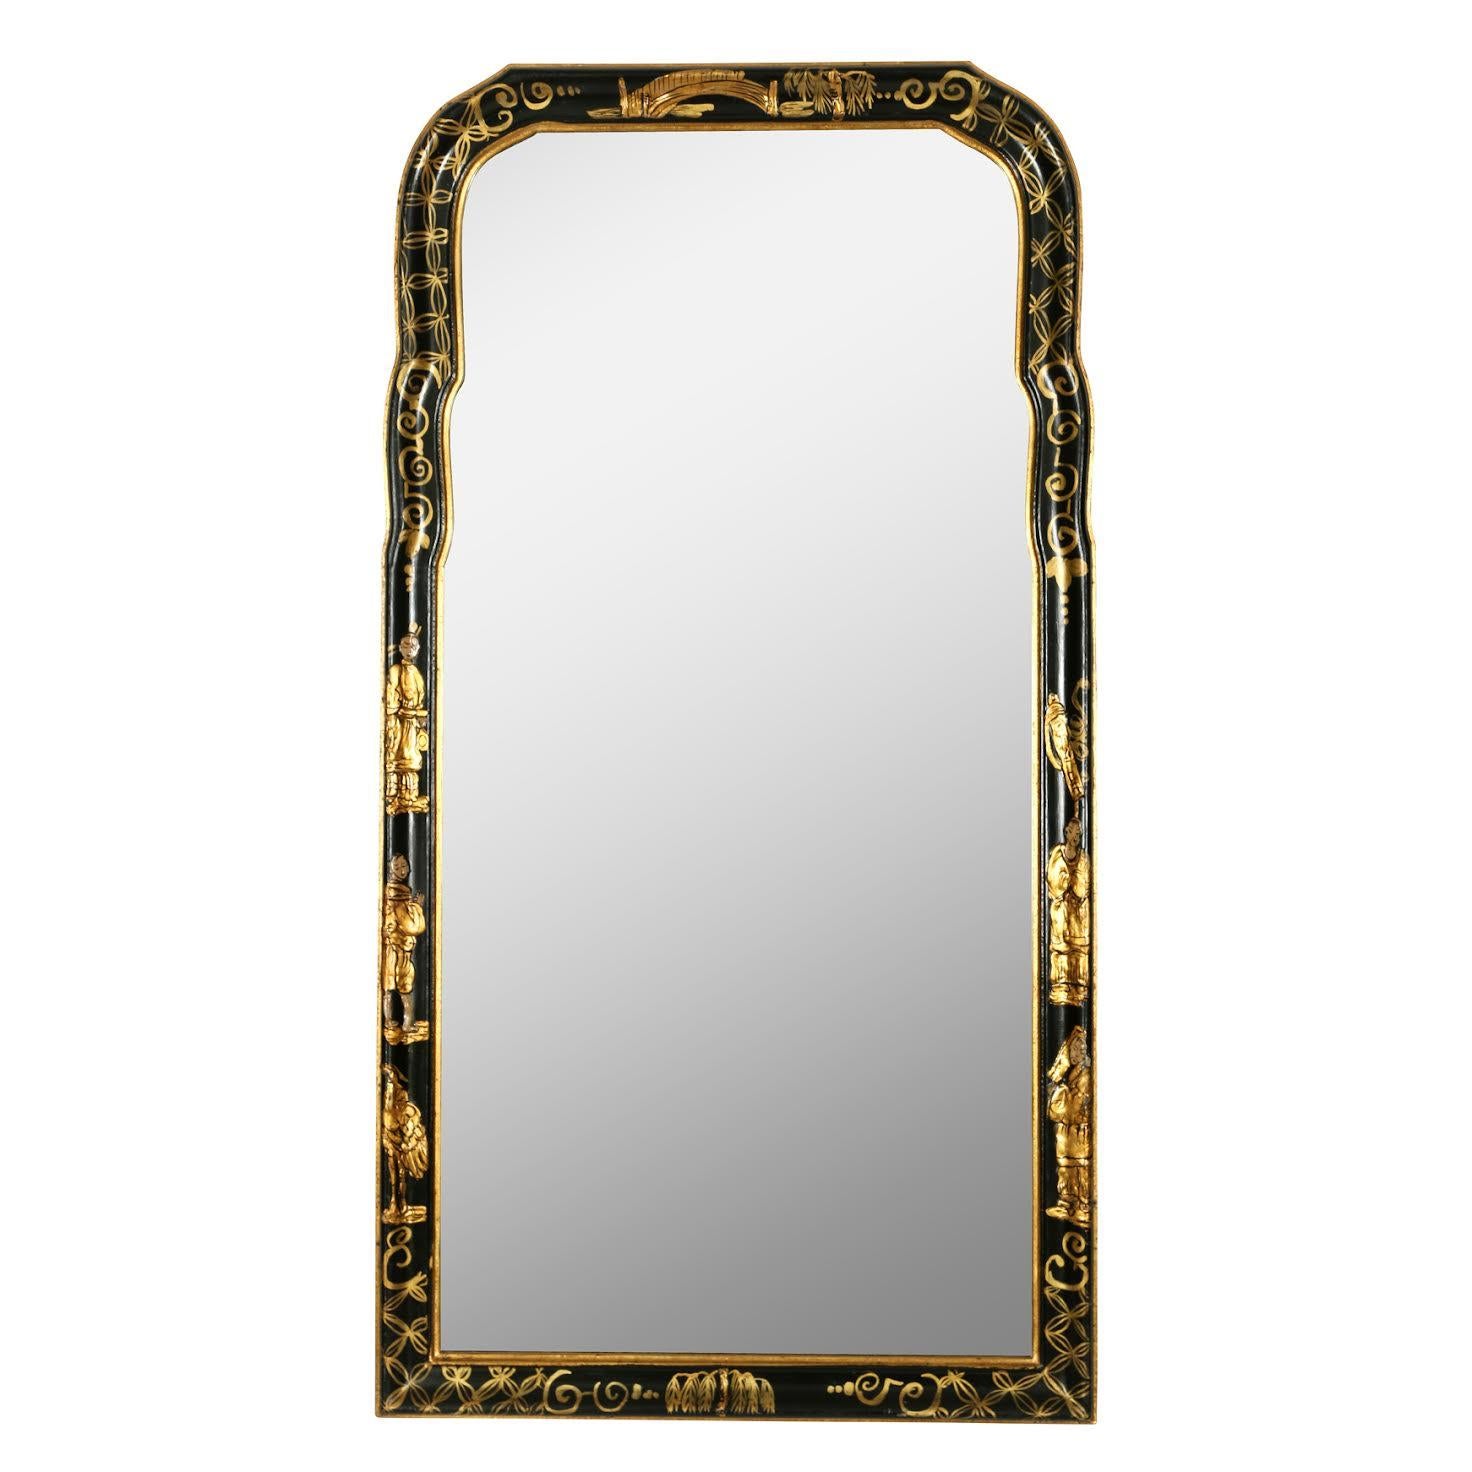 Every home needs a bit of Chinoiserie! This lovely mirror is painted black with gilt trim, hand painted with a Chinoiserie motif. The top is curved, creating an interesting silhouette. A perfect layering piece in any room.